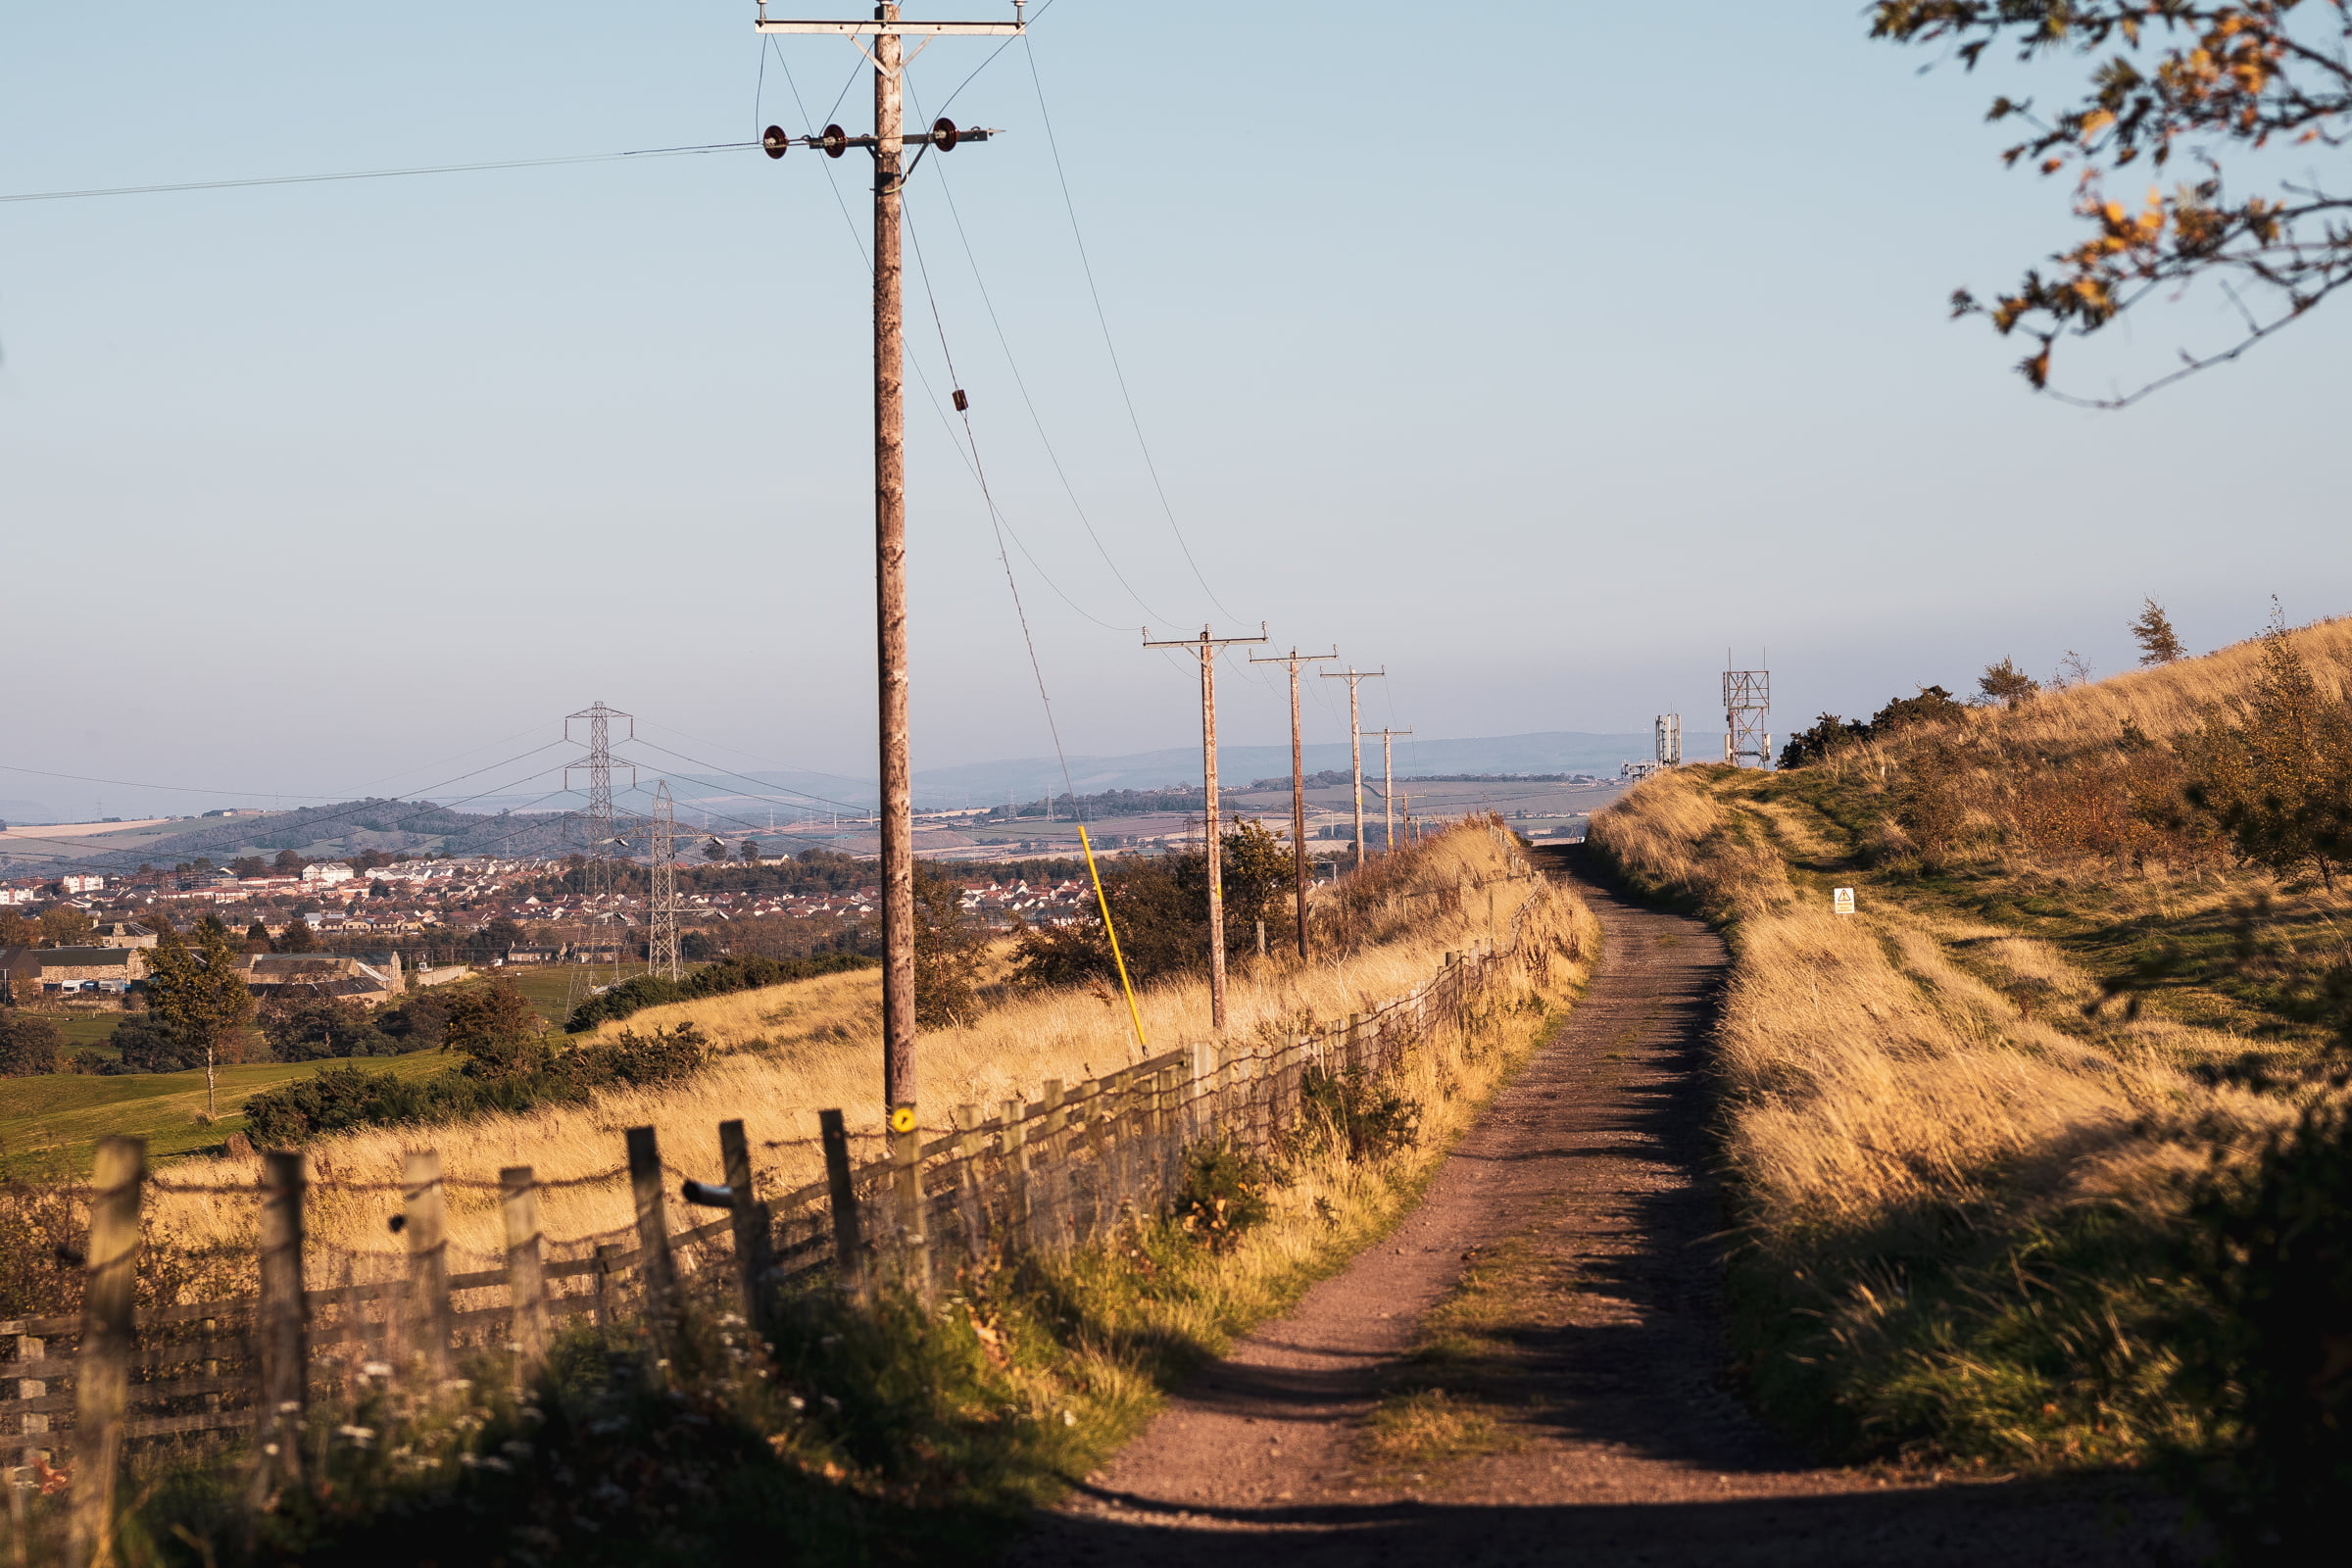 A sunny path across a hill flanked by power poles.